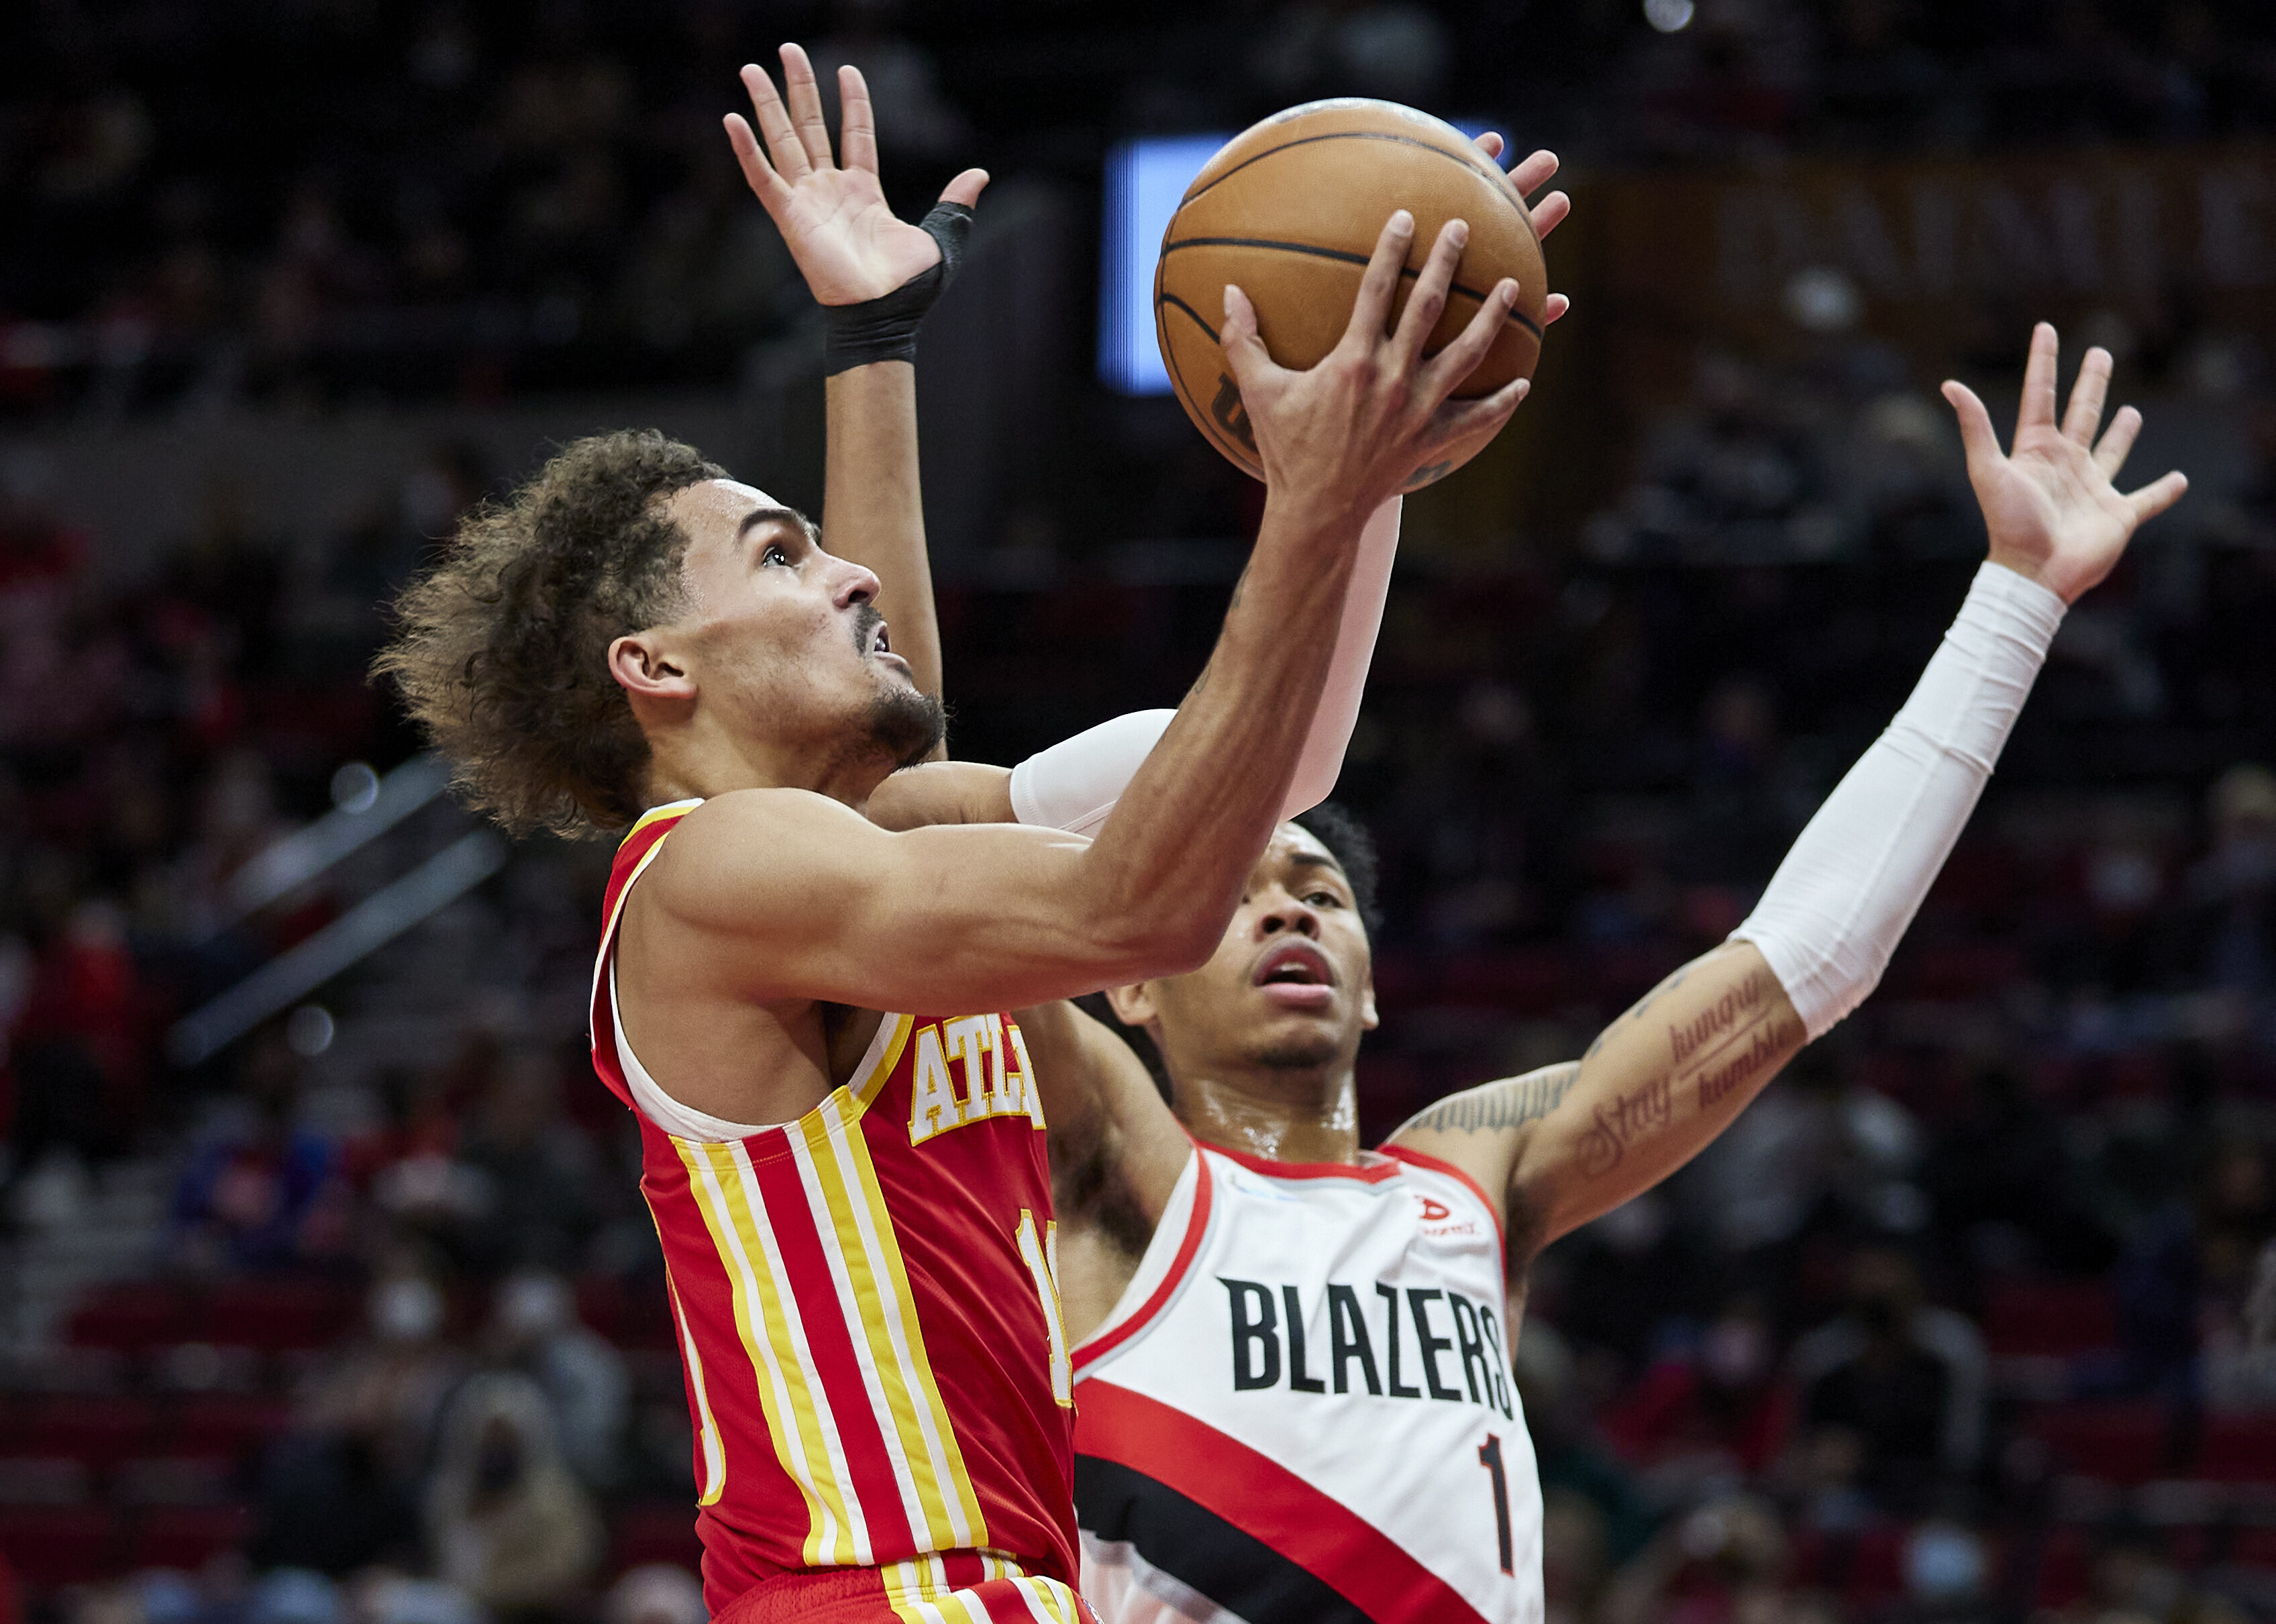 Hawks star Trae Young sounds off about Kevin Huerter, Kings